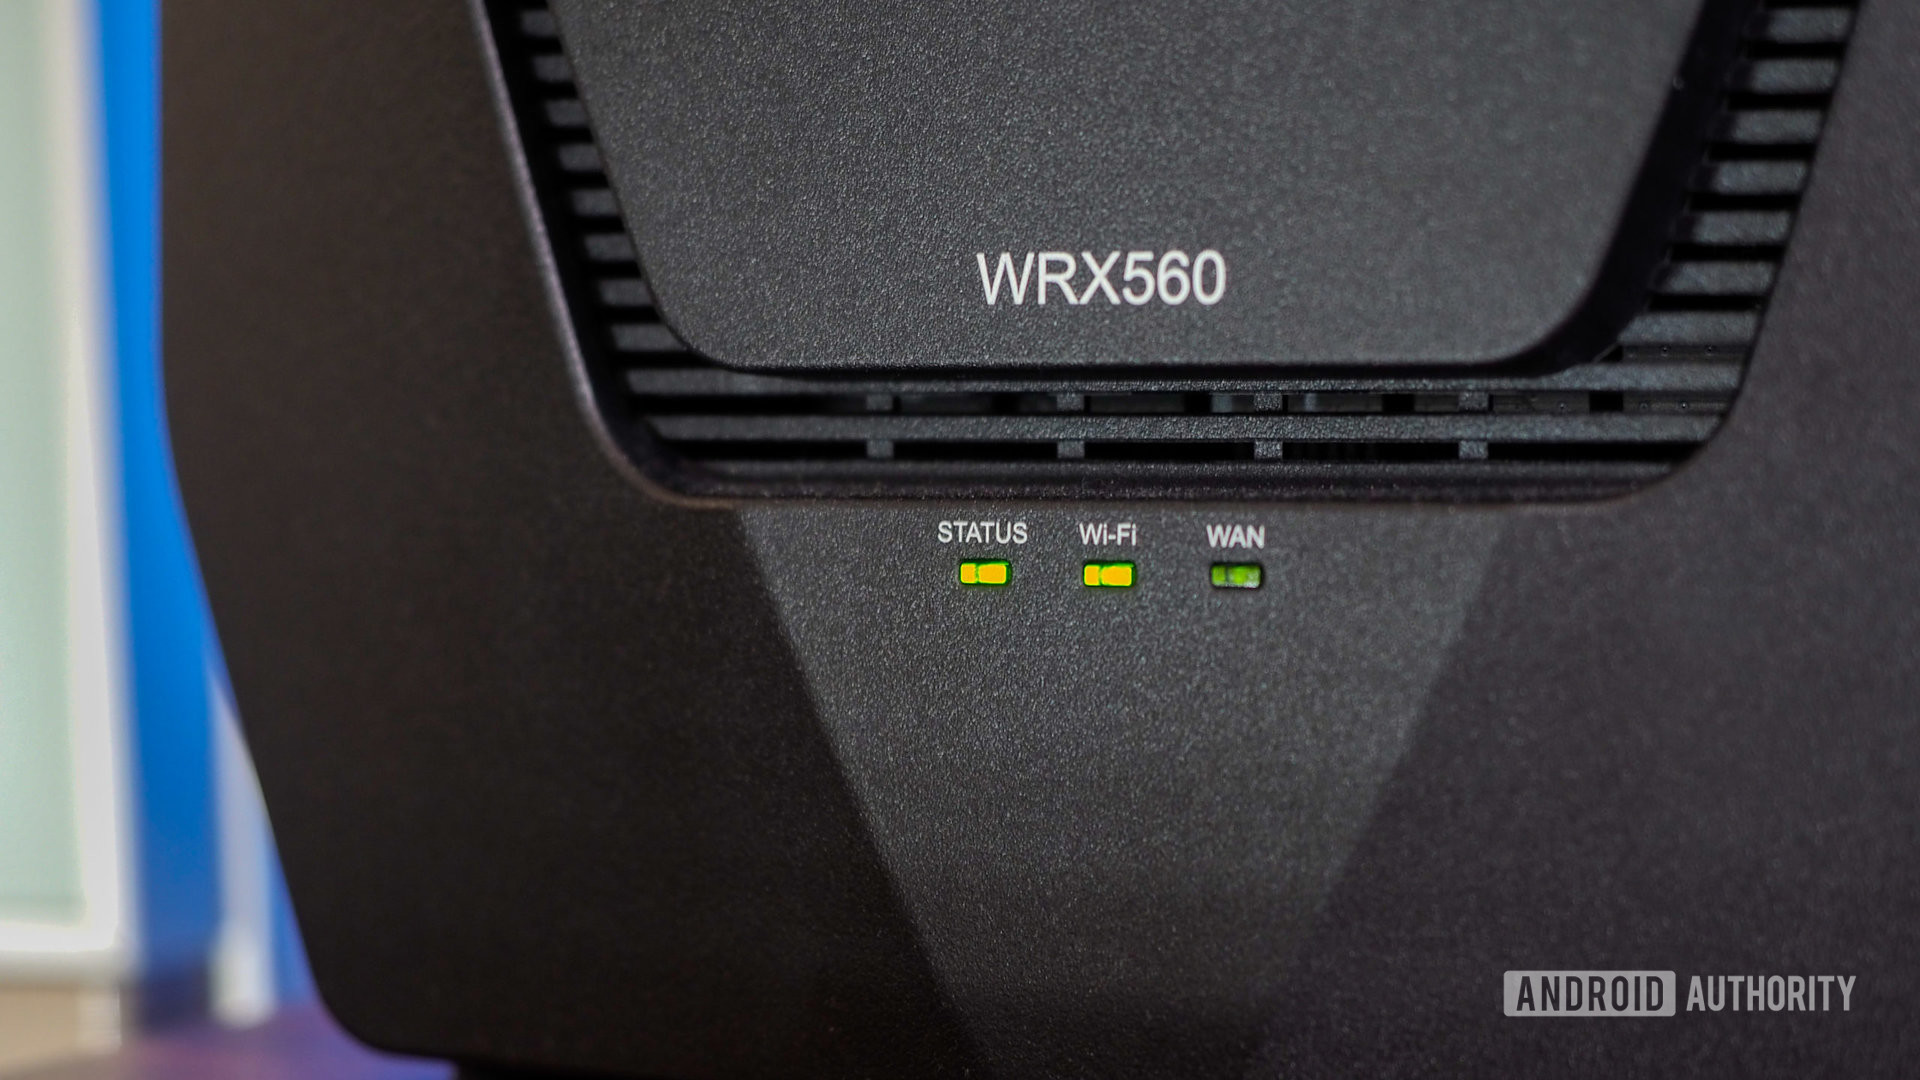 Synology WRX560 router, focus on the front logo and status LED lights